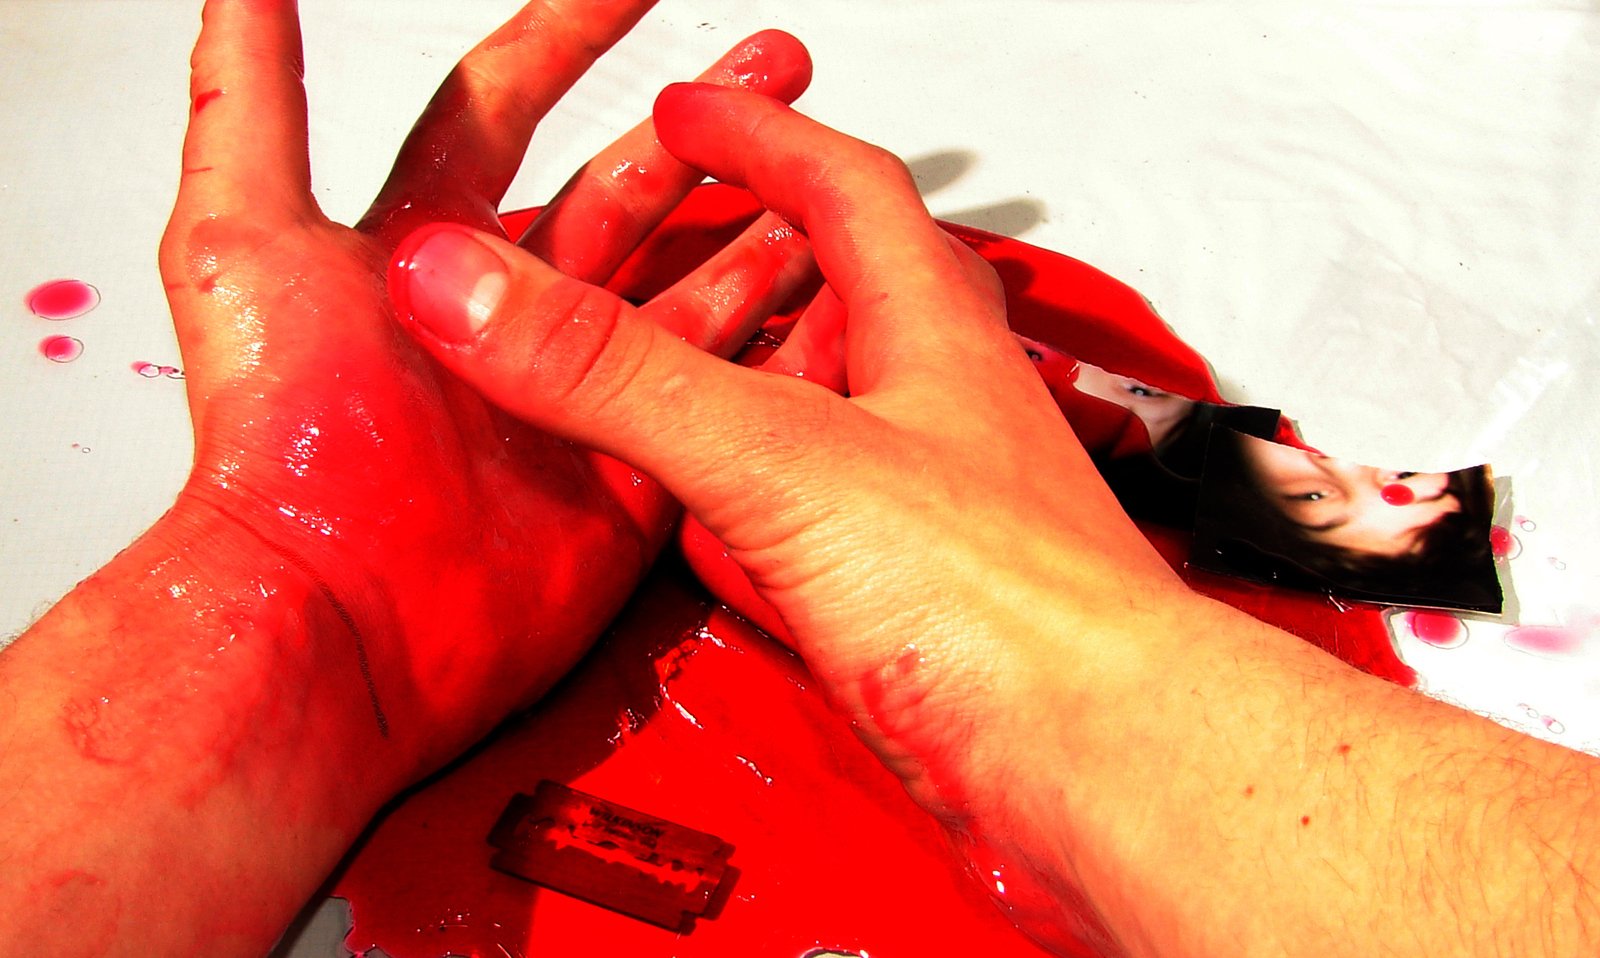 two persons'hands covered in red paint